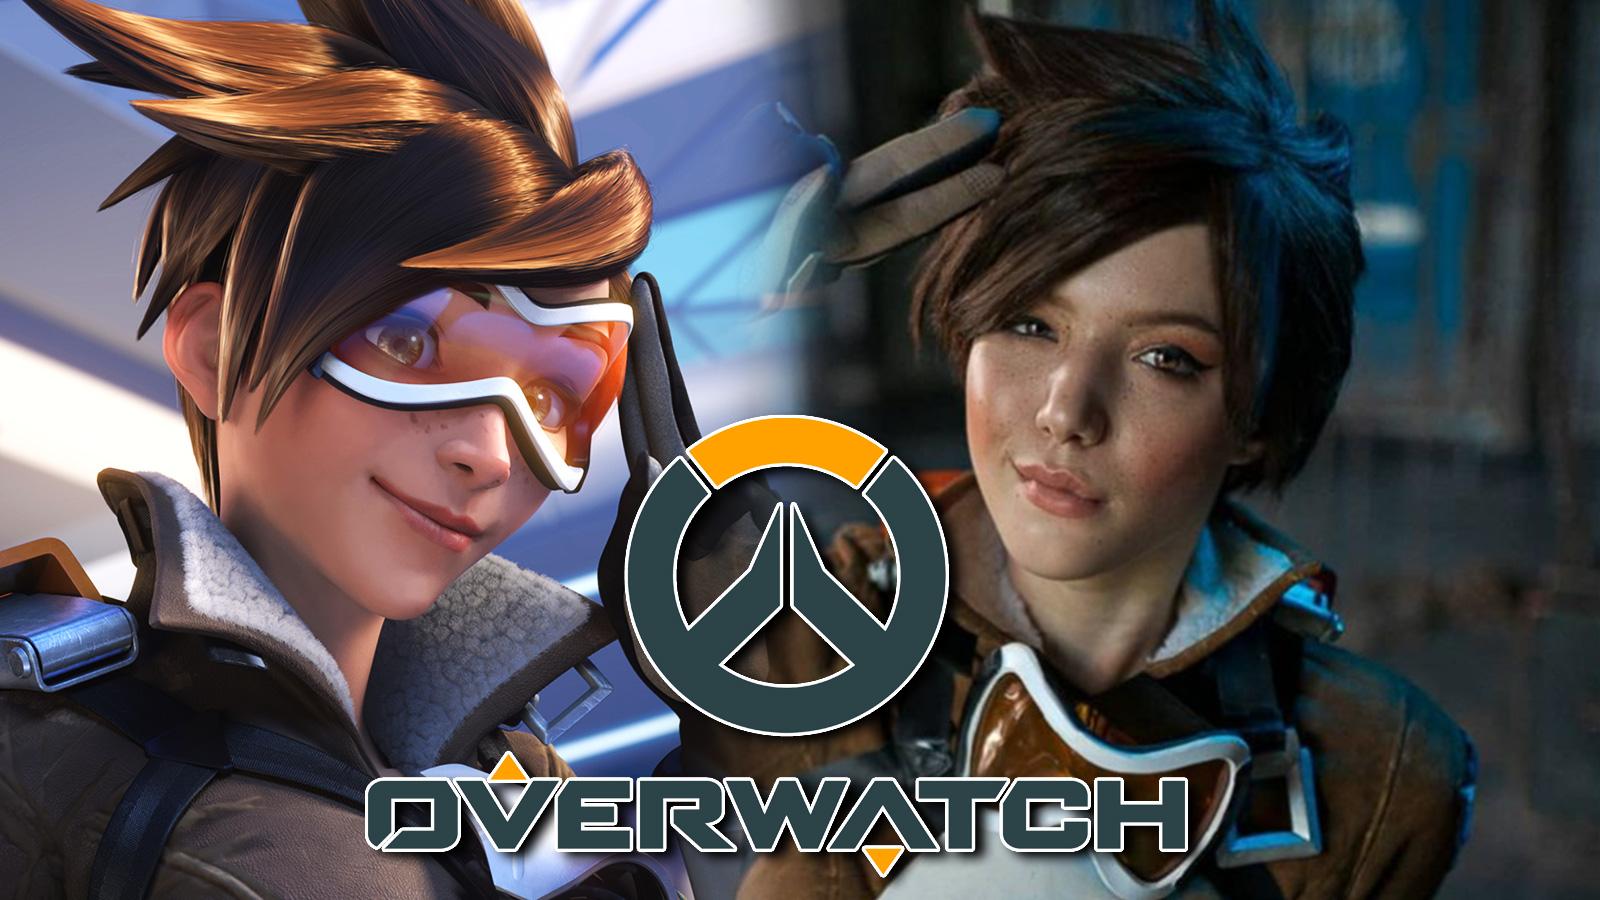 Screenshot of Tracer from Overwatch next to cosplayer.